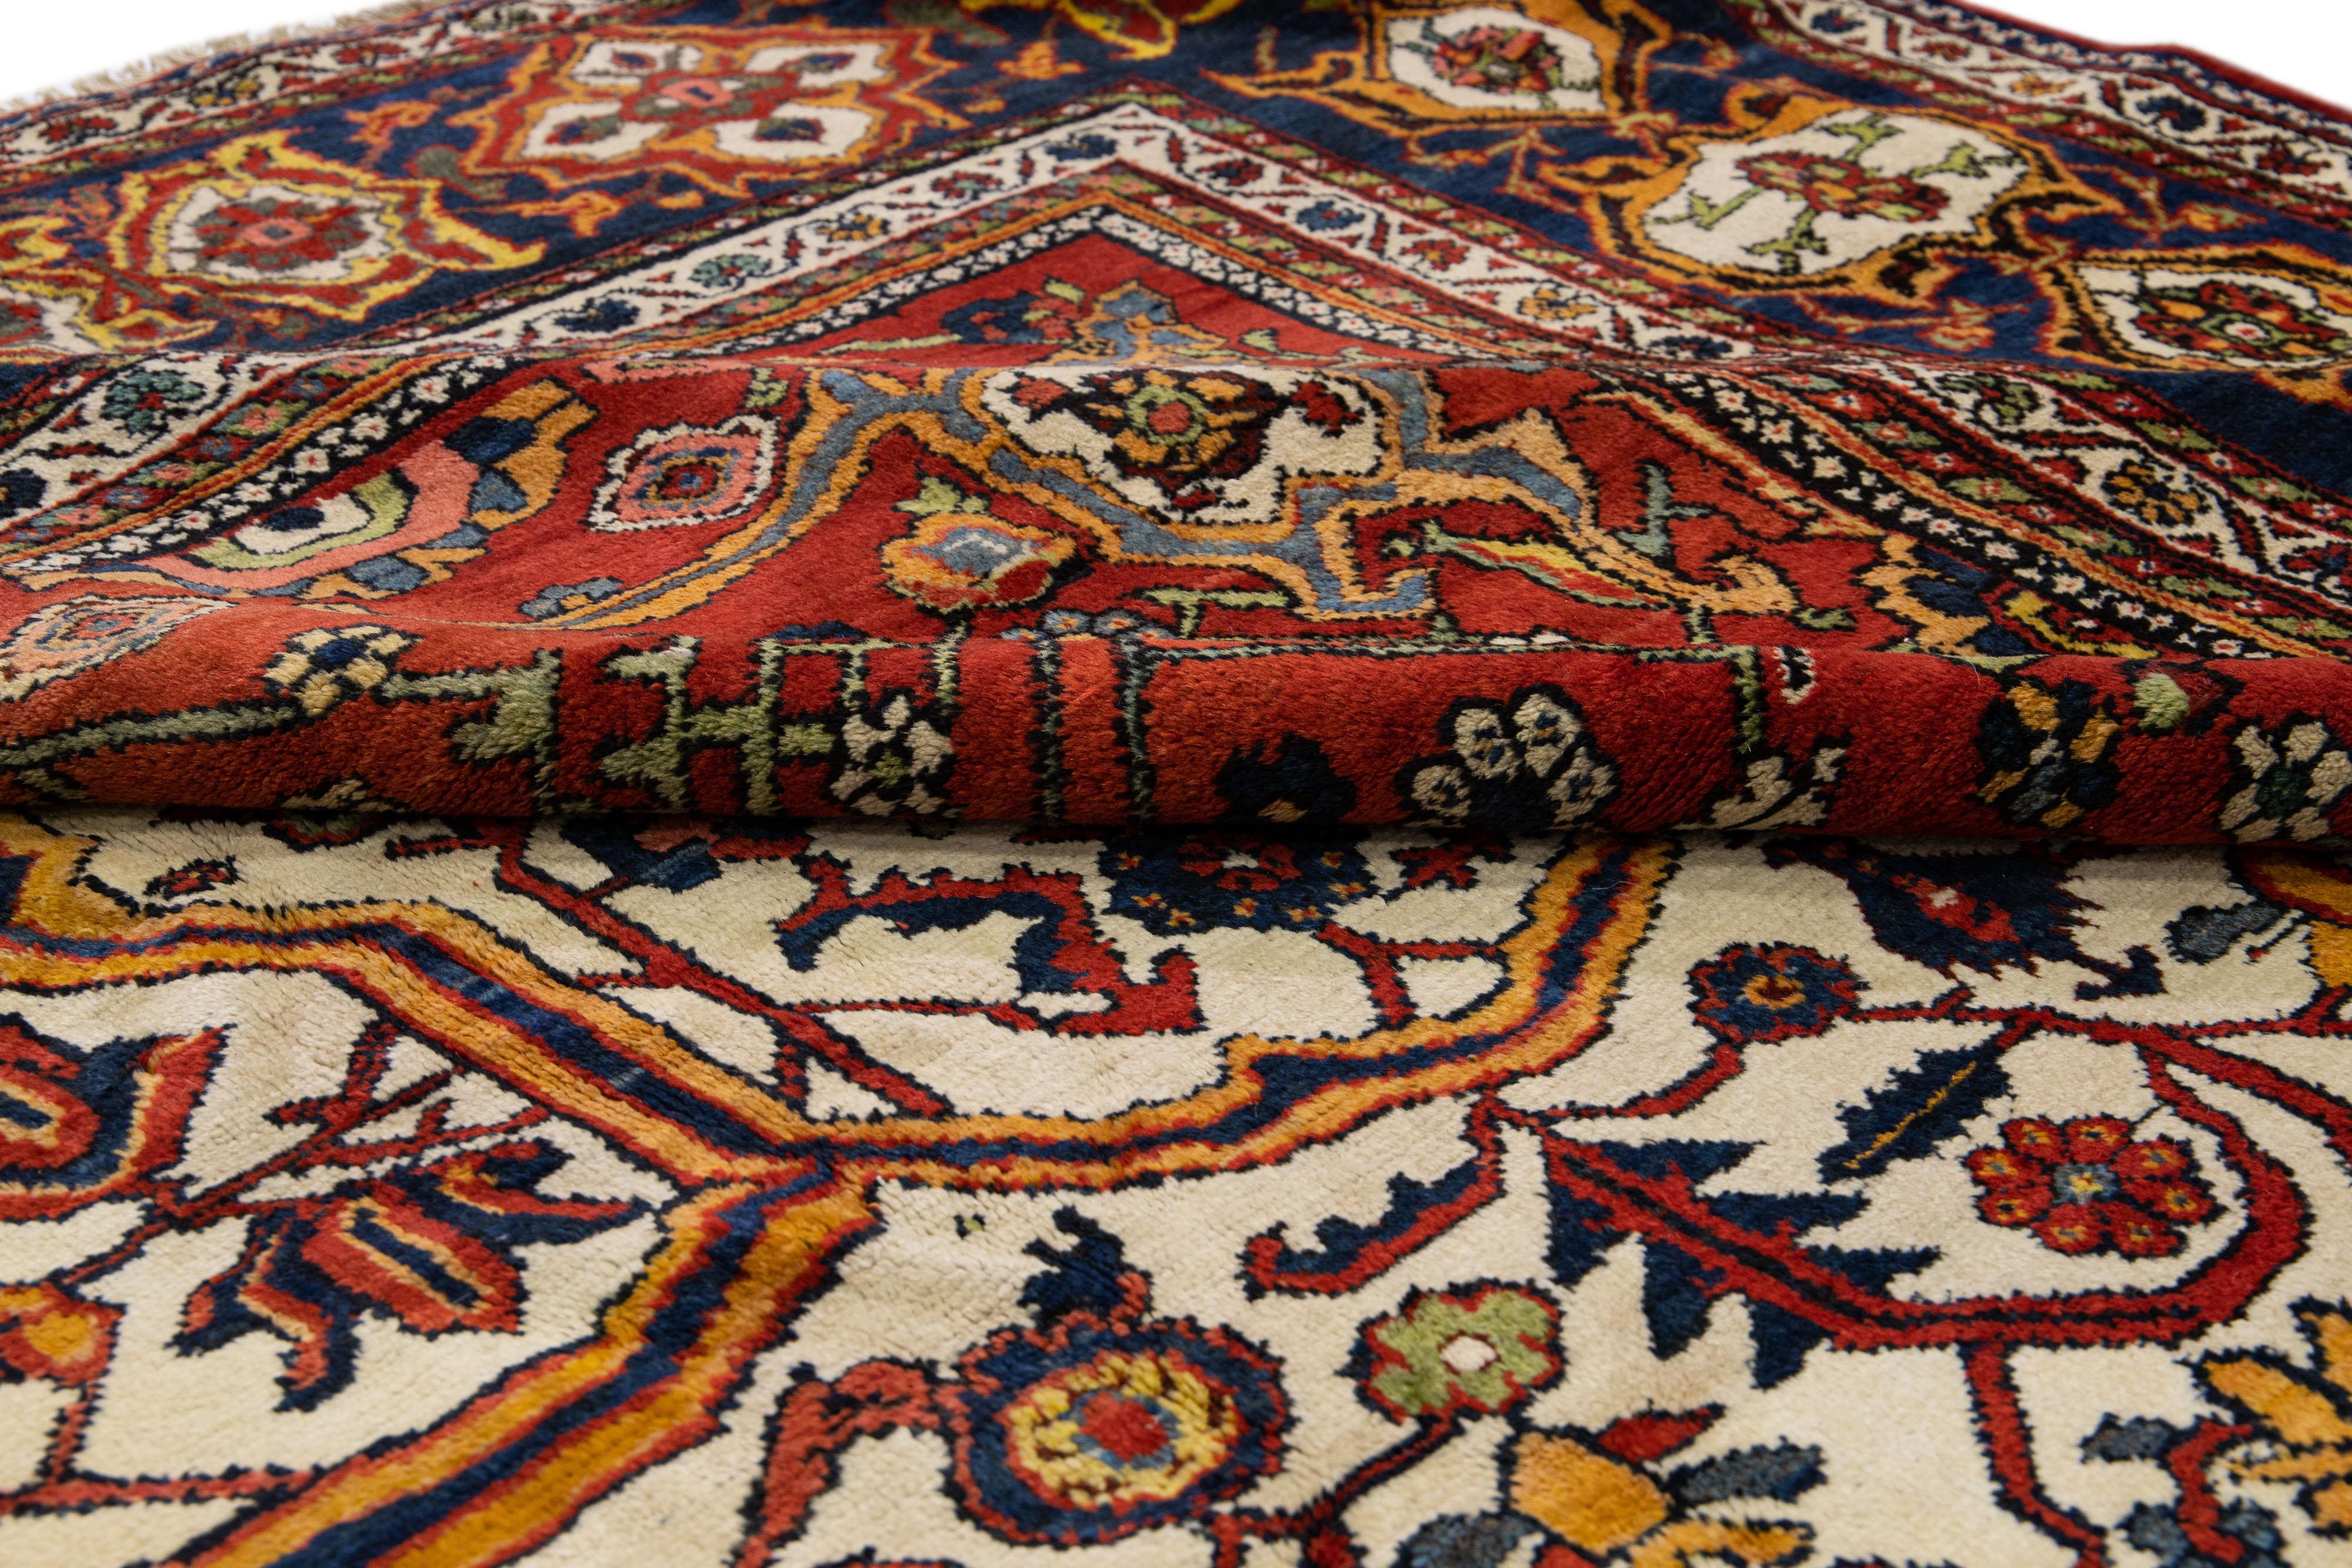 Antique Bakhtiari Persian Handmade Red and Blue Floral Oversize Wool Rug For Sale 1